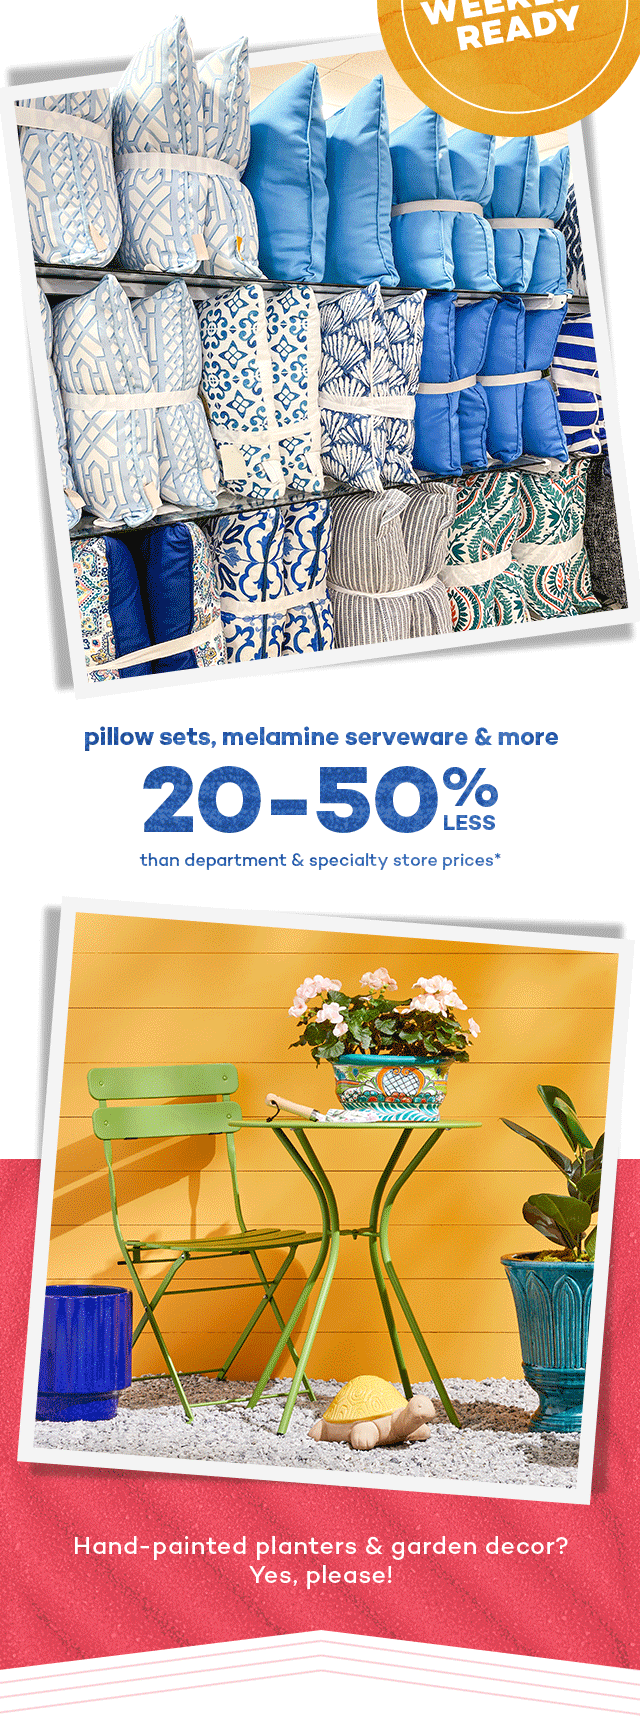 Long weekend ready. Pillow sets, melamine serveware and more 20 to 50 percent less than department and specialty store prices.* Hand-painted planters and garden decor? Yes, please!